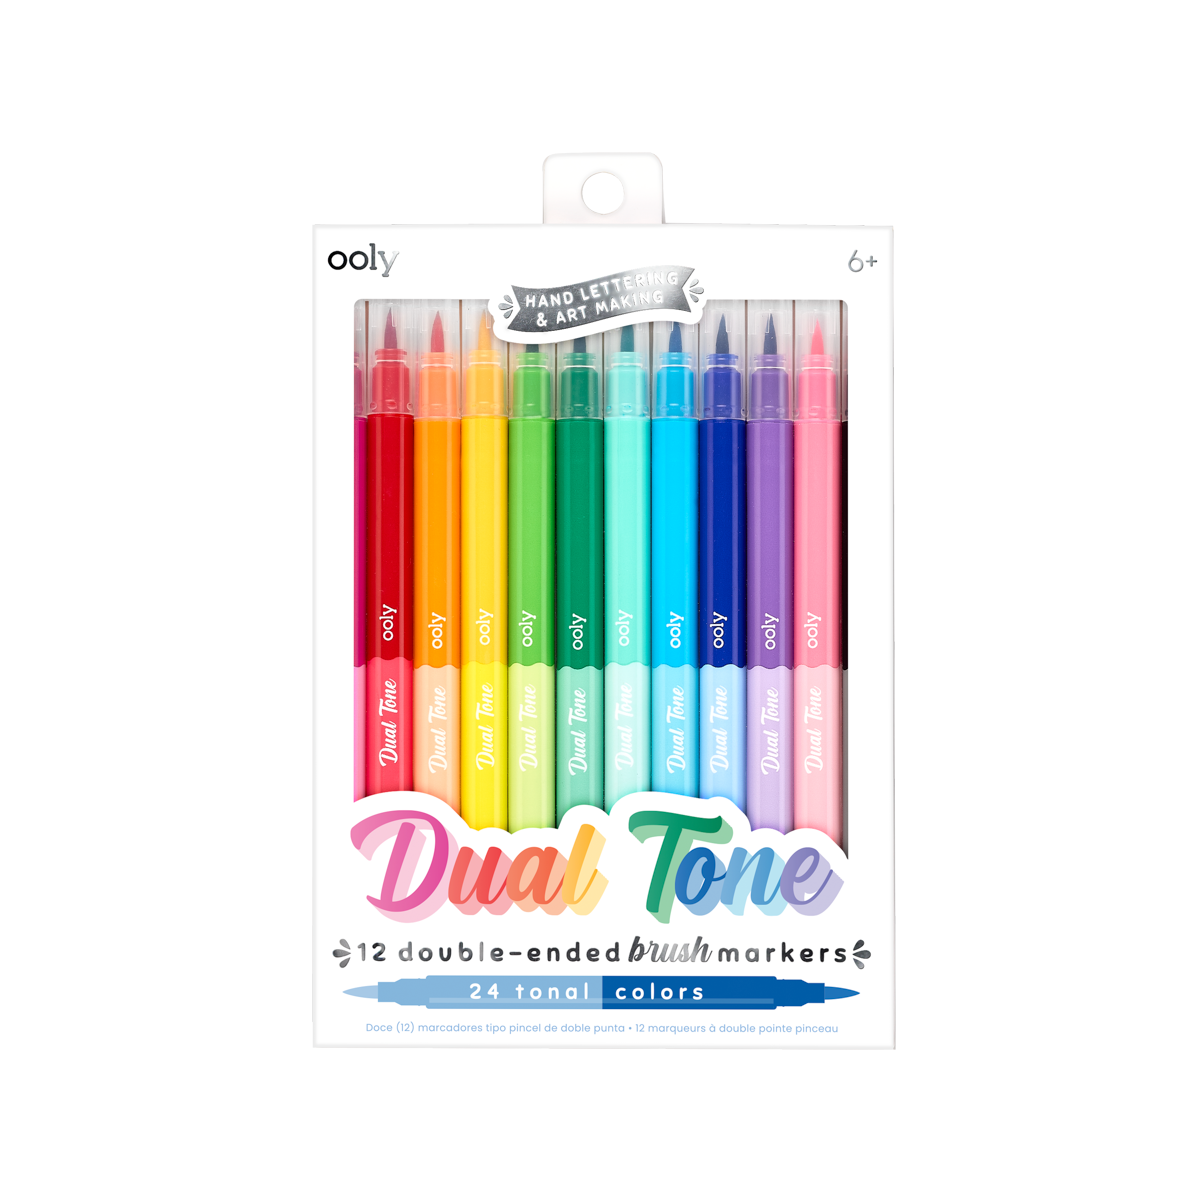 Make No Mistakes Erasable Markers – Awesome Toys Gifts